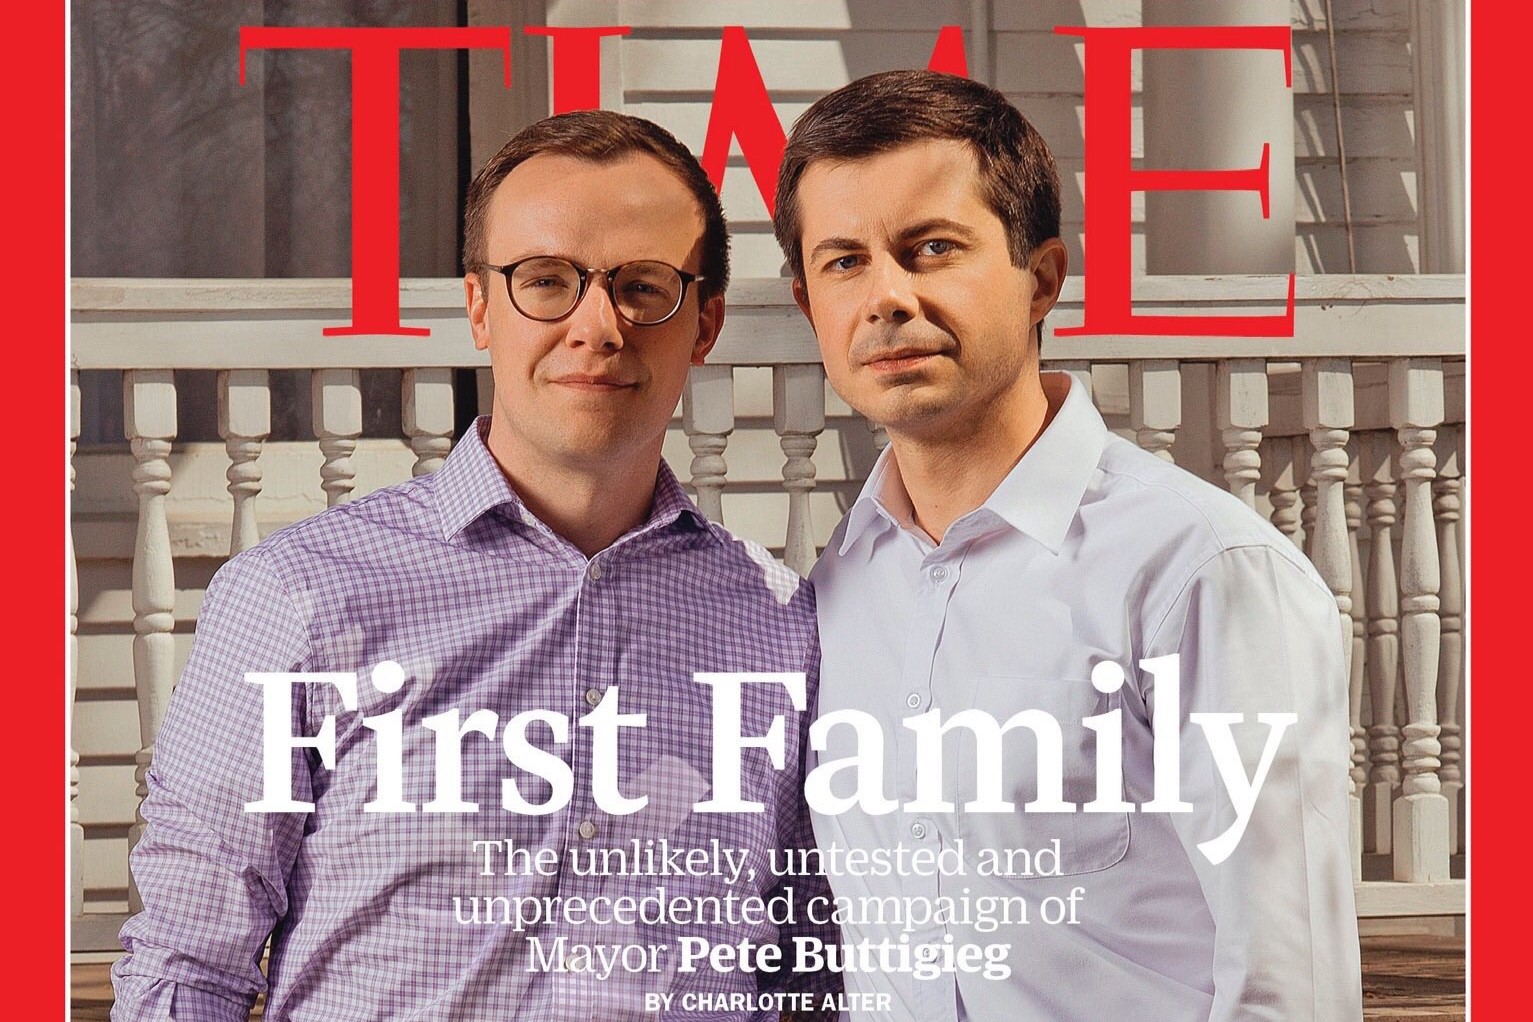 Pete Buttigieg and husband Chasten dubbed 'First Family' on cover of Time - Metro Weekly1533 x 1022